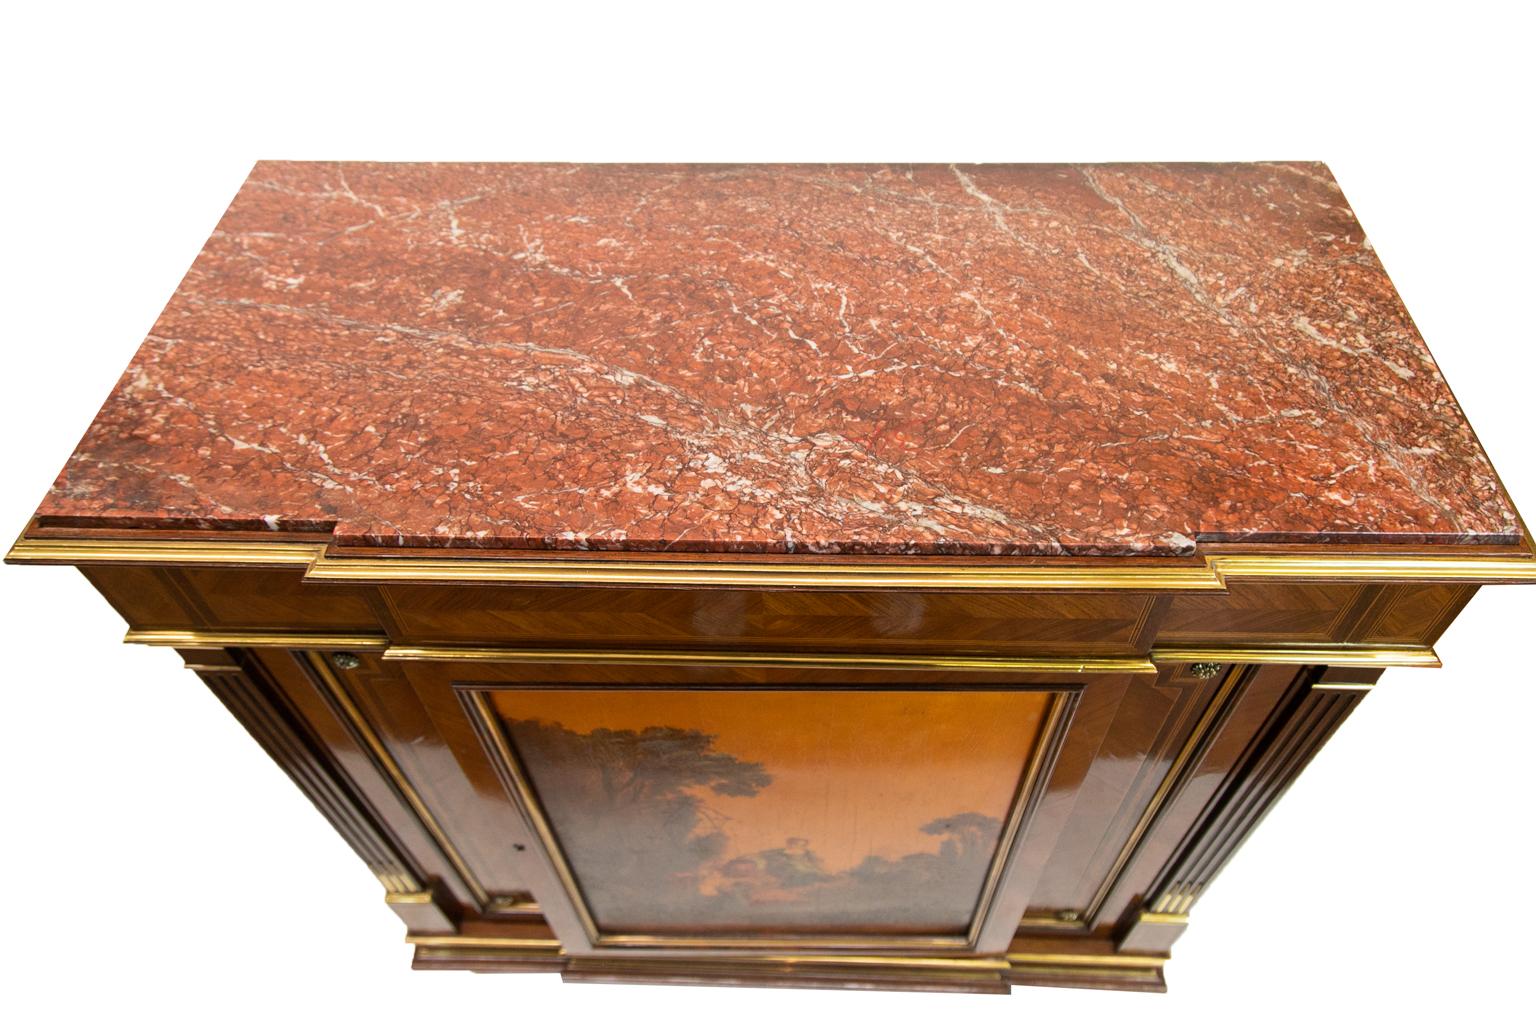 The marble top of this painted French inlaid console cabinet is framed with shaped brass molding. The frieze has bookmatched herringbone inlaid panels framed by boxwood and ebony line inlays. There is raised brass molding below the frieze. The